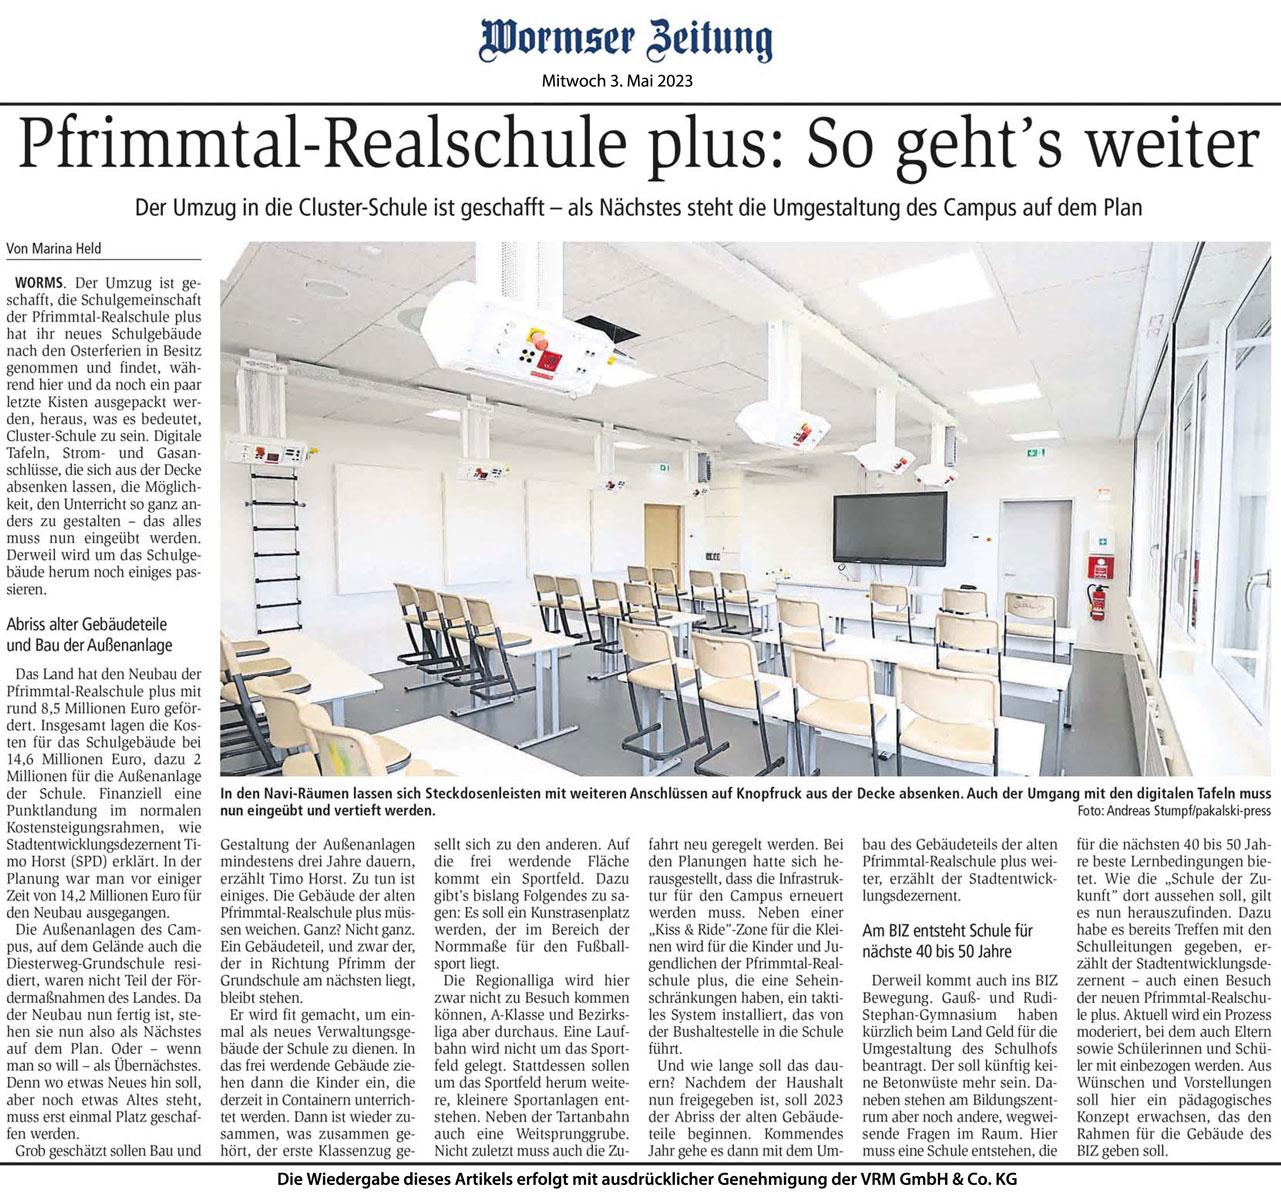 Pfrimmtal-Realschule plus: So geht’s weiter